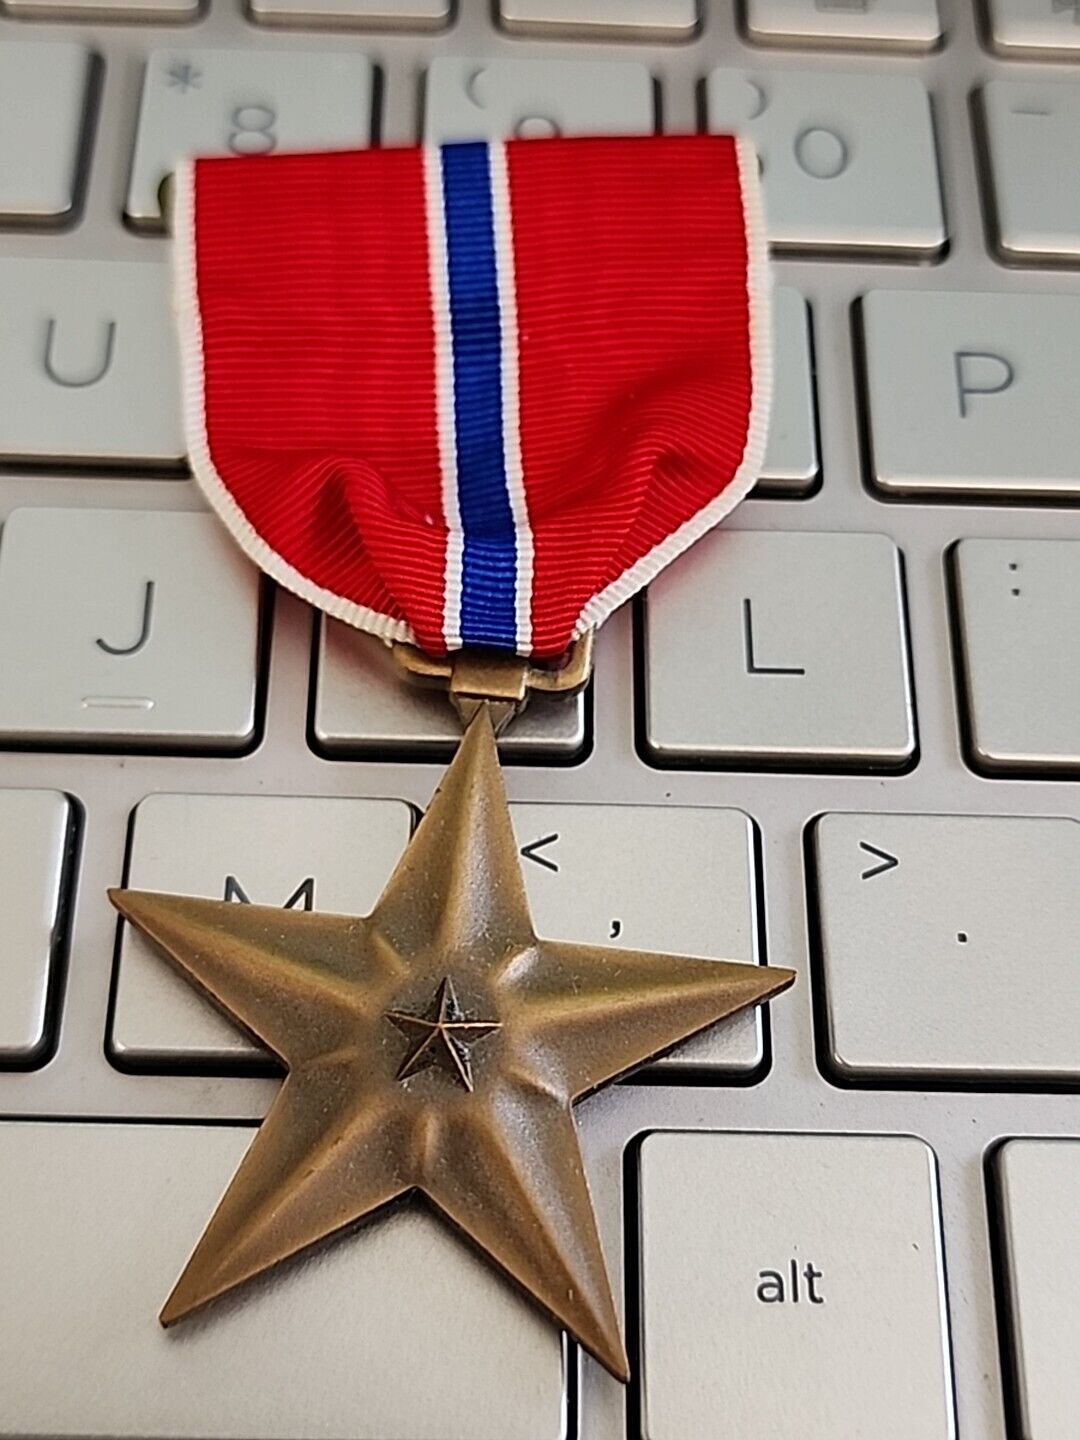 WW2, BRONZE STAR  REAL THING SEE STORE WW2 MEDALS -STORE OWN BY NAVY VET- HOOYA